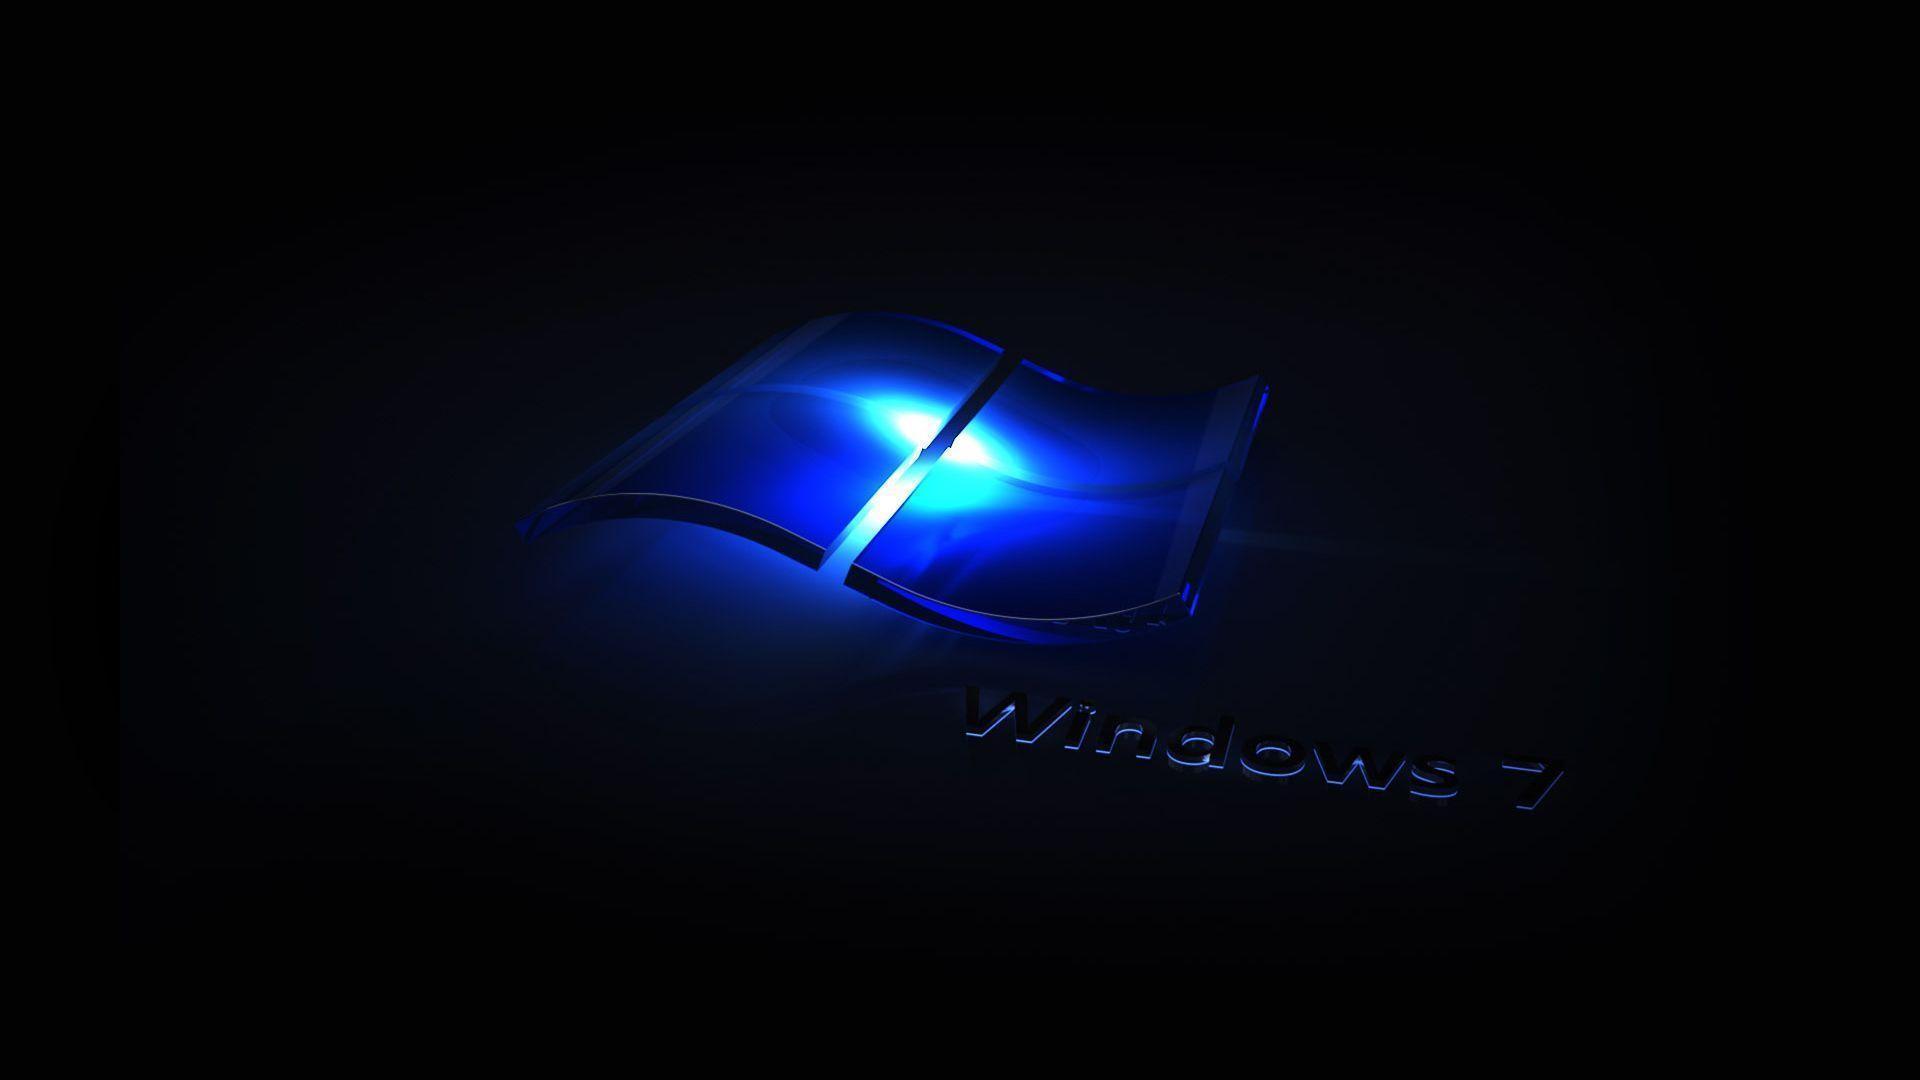 Windows 7 Wallpaper 1920x1080 Picture to pin